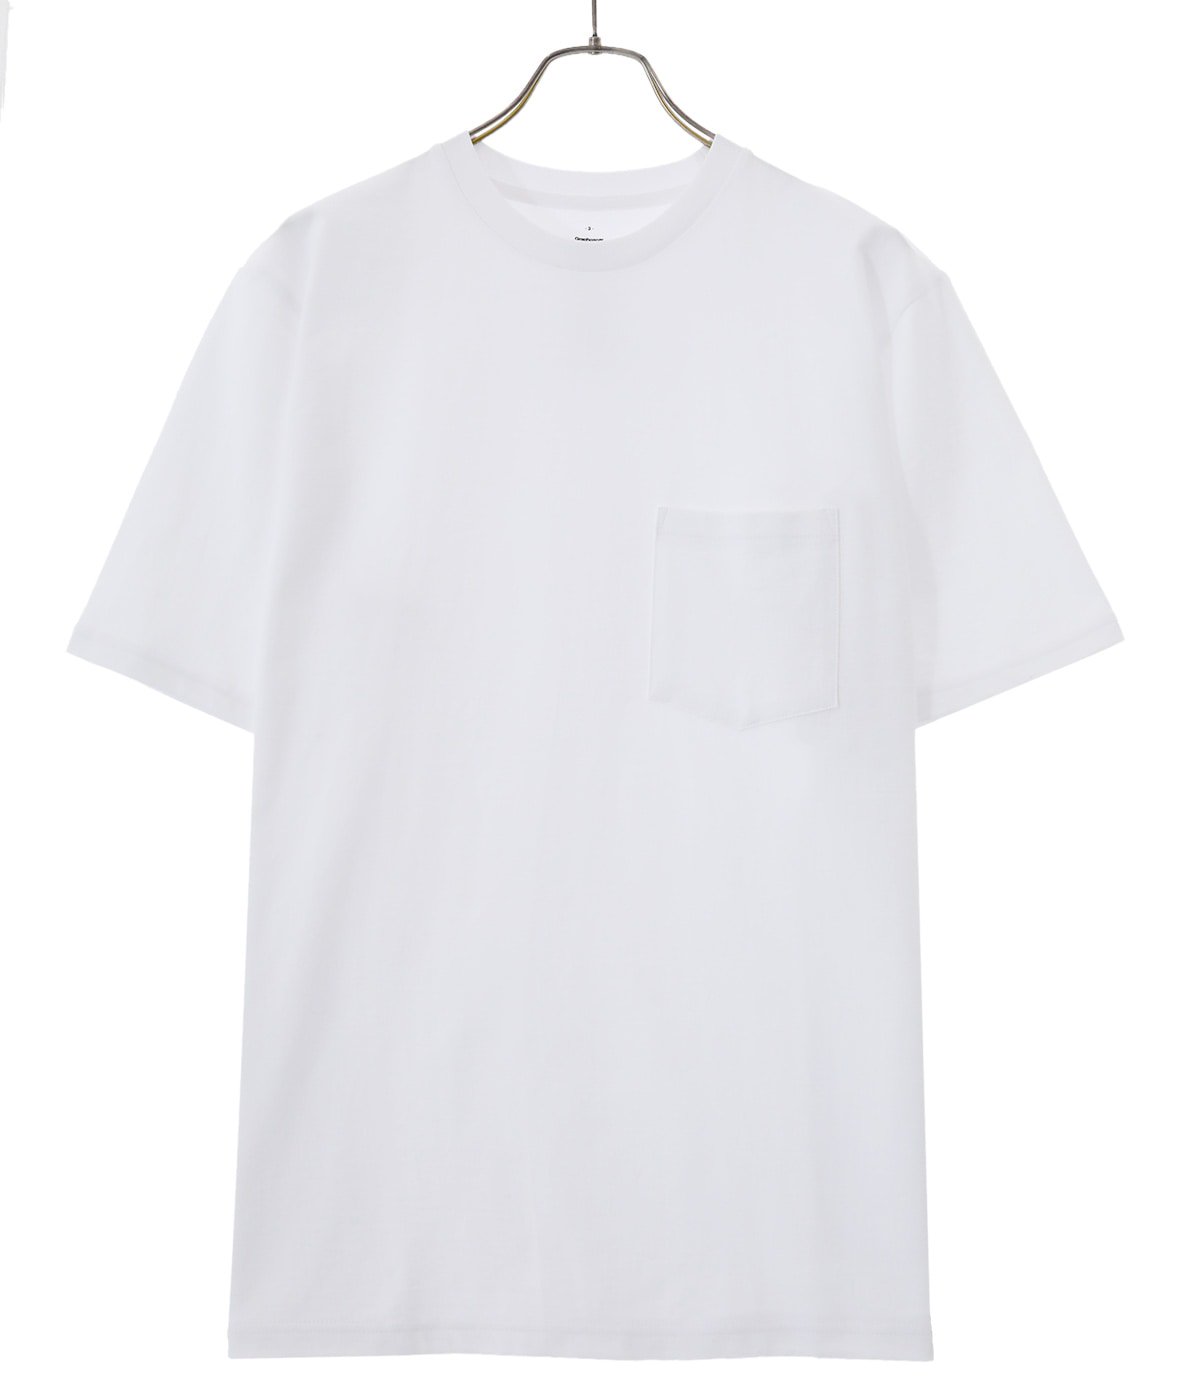 2-Pack S/S Pocket Tee | Graphpaper(グラフペーパー) / トップス カットソー半袖・Tシャツ (メンズ)の